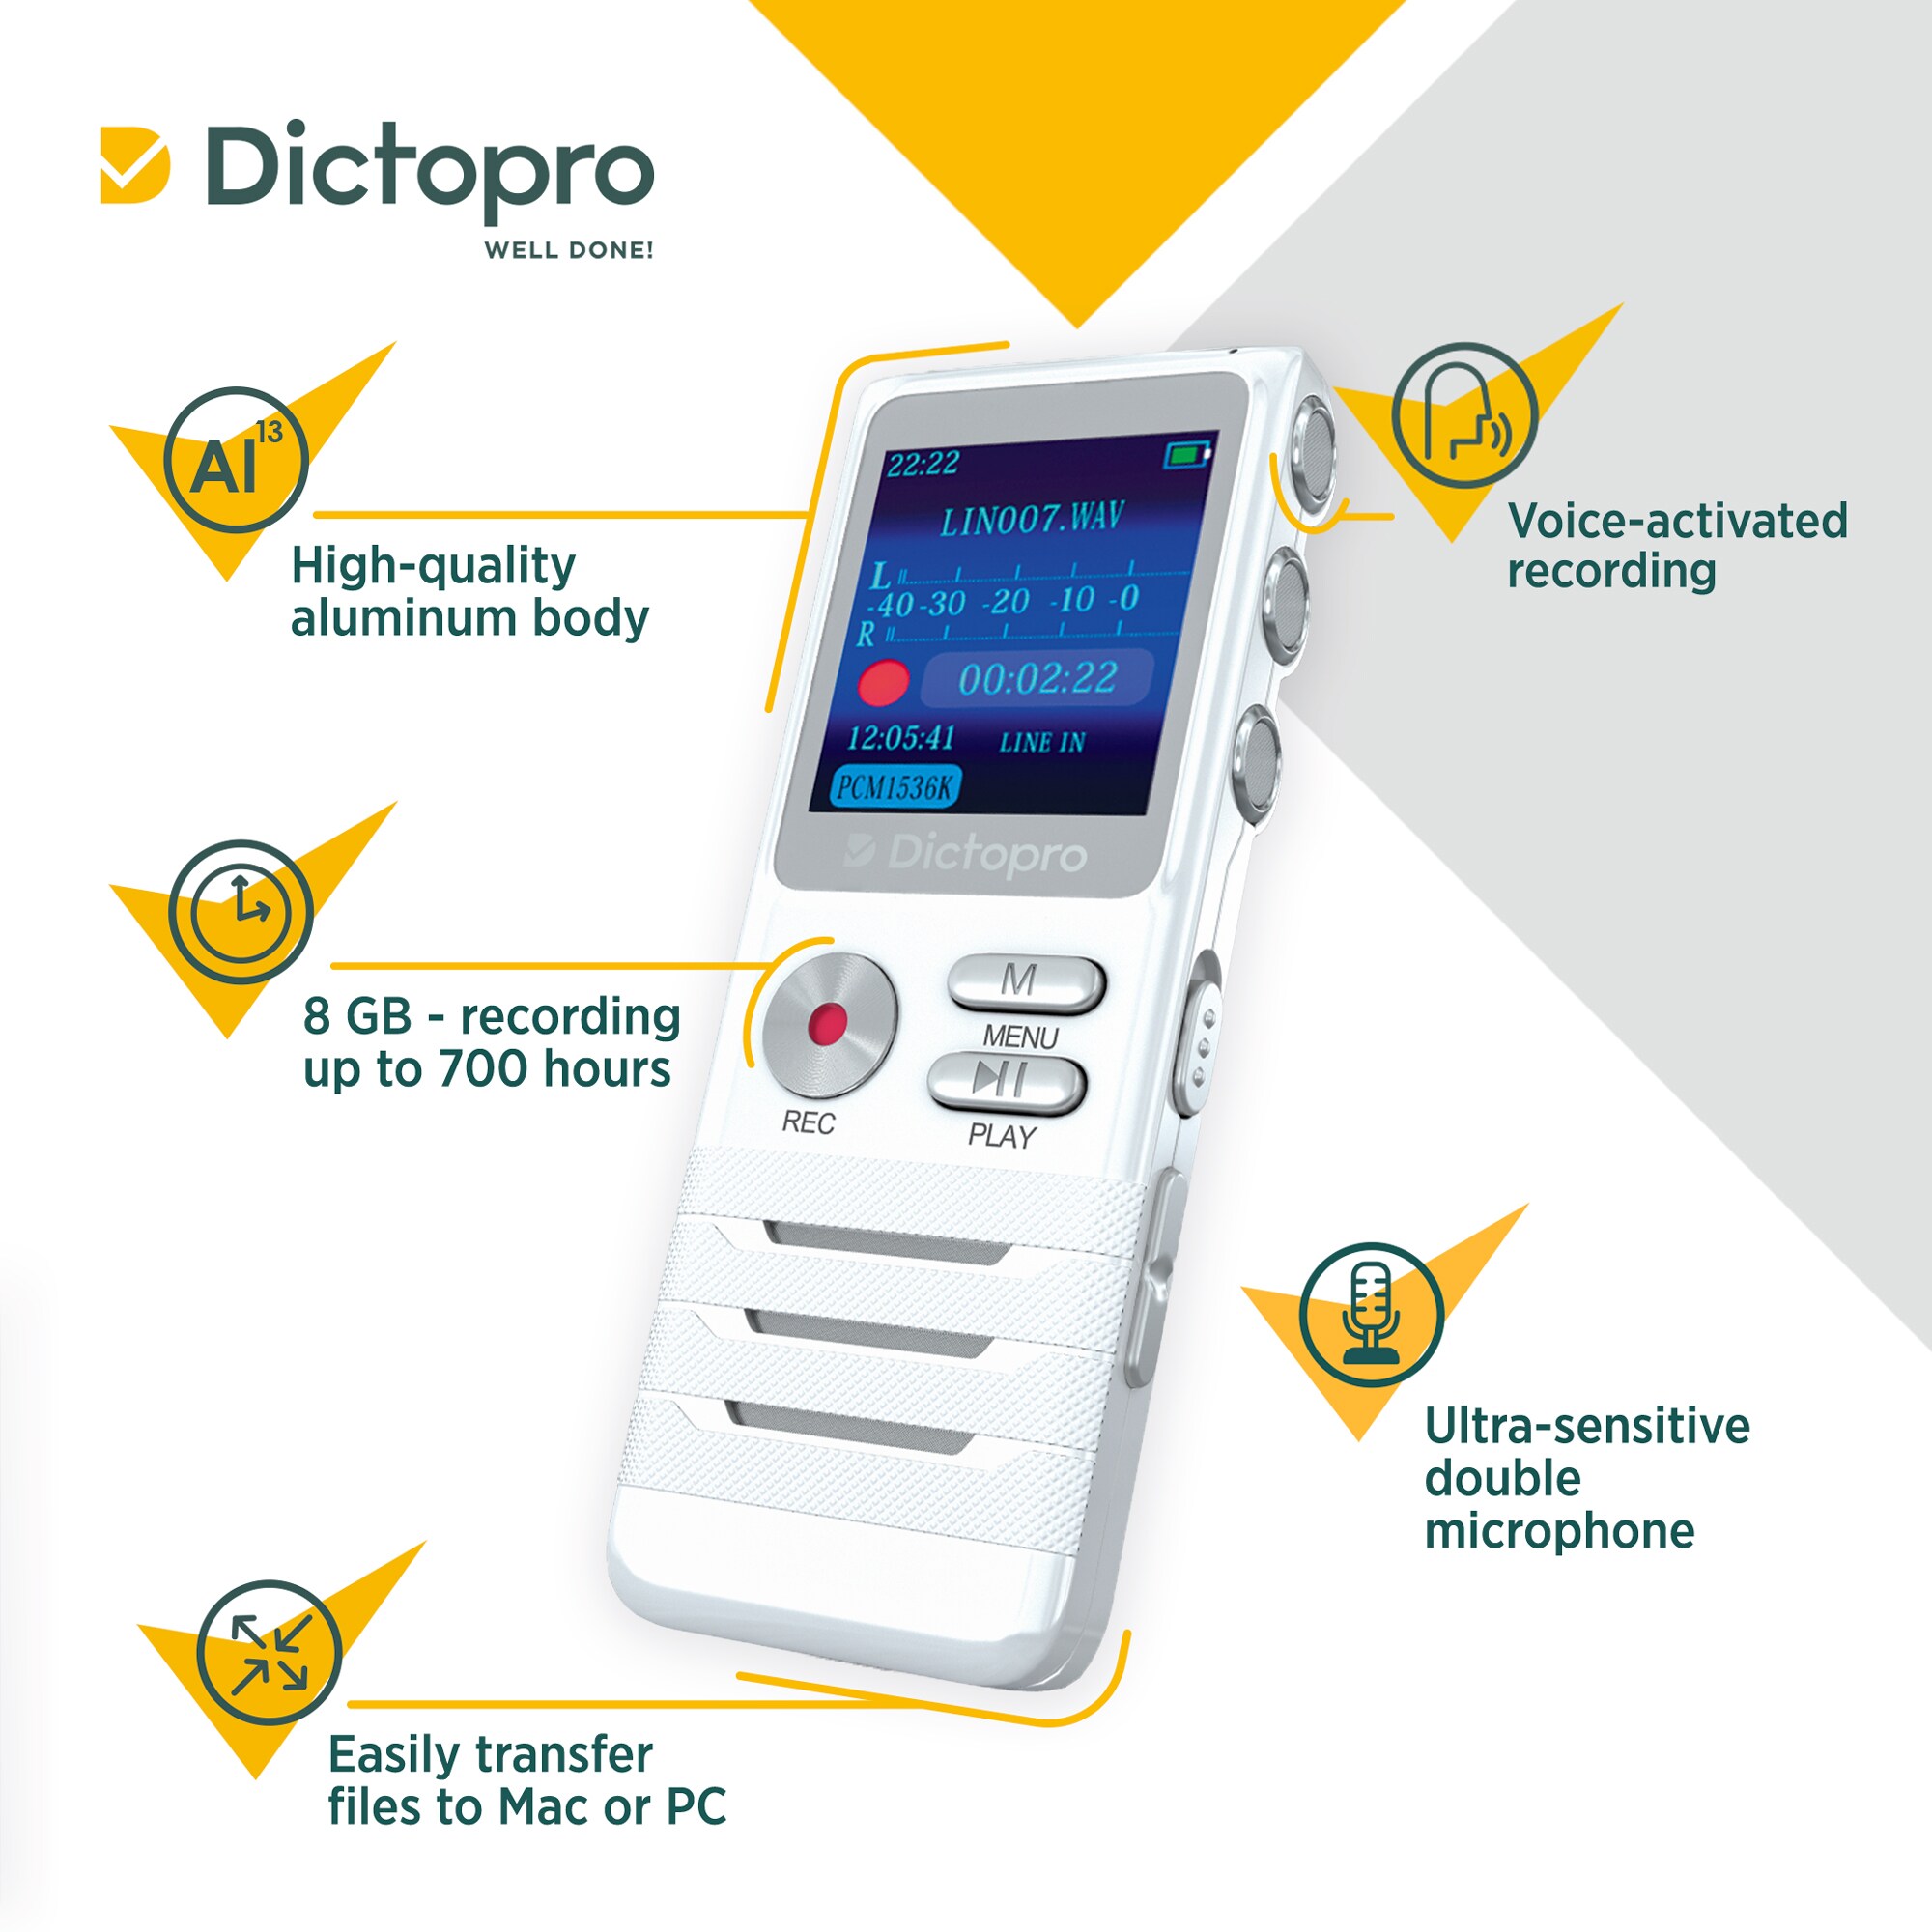 Dictopro X200 Digital Voice Activated Recorder Small & Portable with 8GB Memmory for sale online 